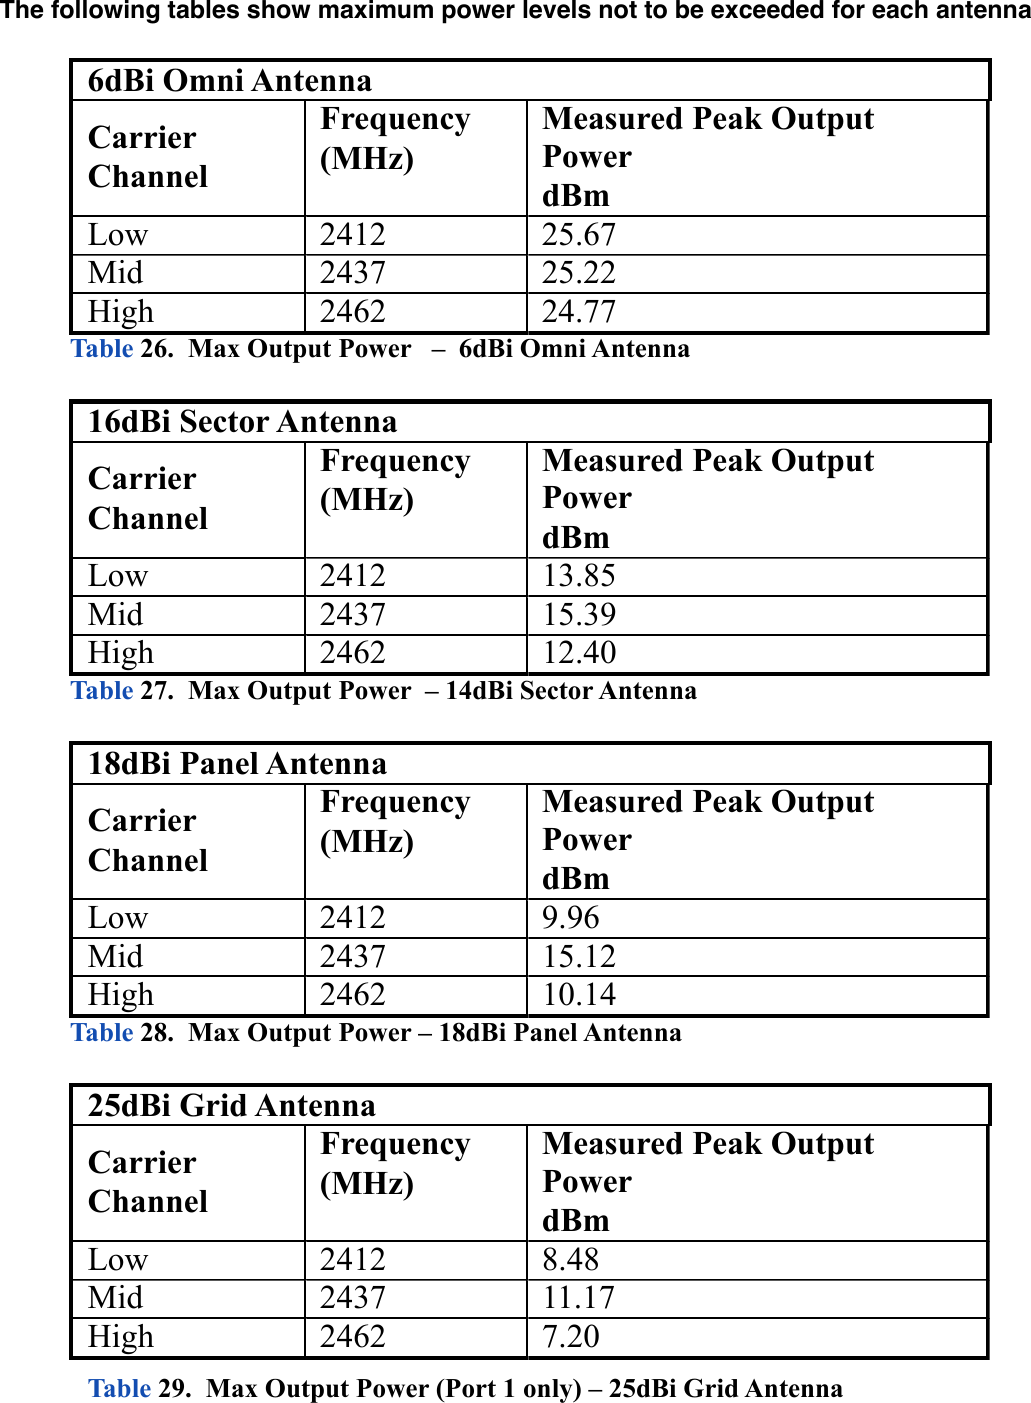 The following tables show maximum power levels not to be exceeded for each antenna6dBi Omni AntennaCarrierChannelFrequency(MHz)Measured Peak Output PowerdBmLow 2412 25.67Mid 2437 25.22High 2462 24.77Table 26.  Max Output Power   –  6dBi Omni Antenna16dBi Sector AntennaCarrierChannelFrequency(MHz)Measured Peak Output PowerdBmLow 2412 13.85Mid 2437 15.39High 2462 12.40Table 27.  Max Output Power  – 14dBi Sector Antenna18dBi Panel AntennaCarrierChannelFrequency(MHz)Measured Peak Output PowerdBmLow 2412 9.96Mid 2437 15.12High 2462 10.14Table 28.  Max Output Power – 18dBi Panel Antenna25dBi Grid AntennaCarrierChannelFrequency(MHz)Measured Peak Output PowerdBmLow 2412 8.48Mid 2437 11.17High 2462 7.20Table 29.  Max Output Power (Port 1 only) – 25dBi Grid Antenna